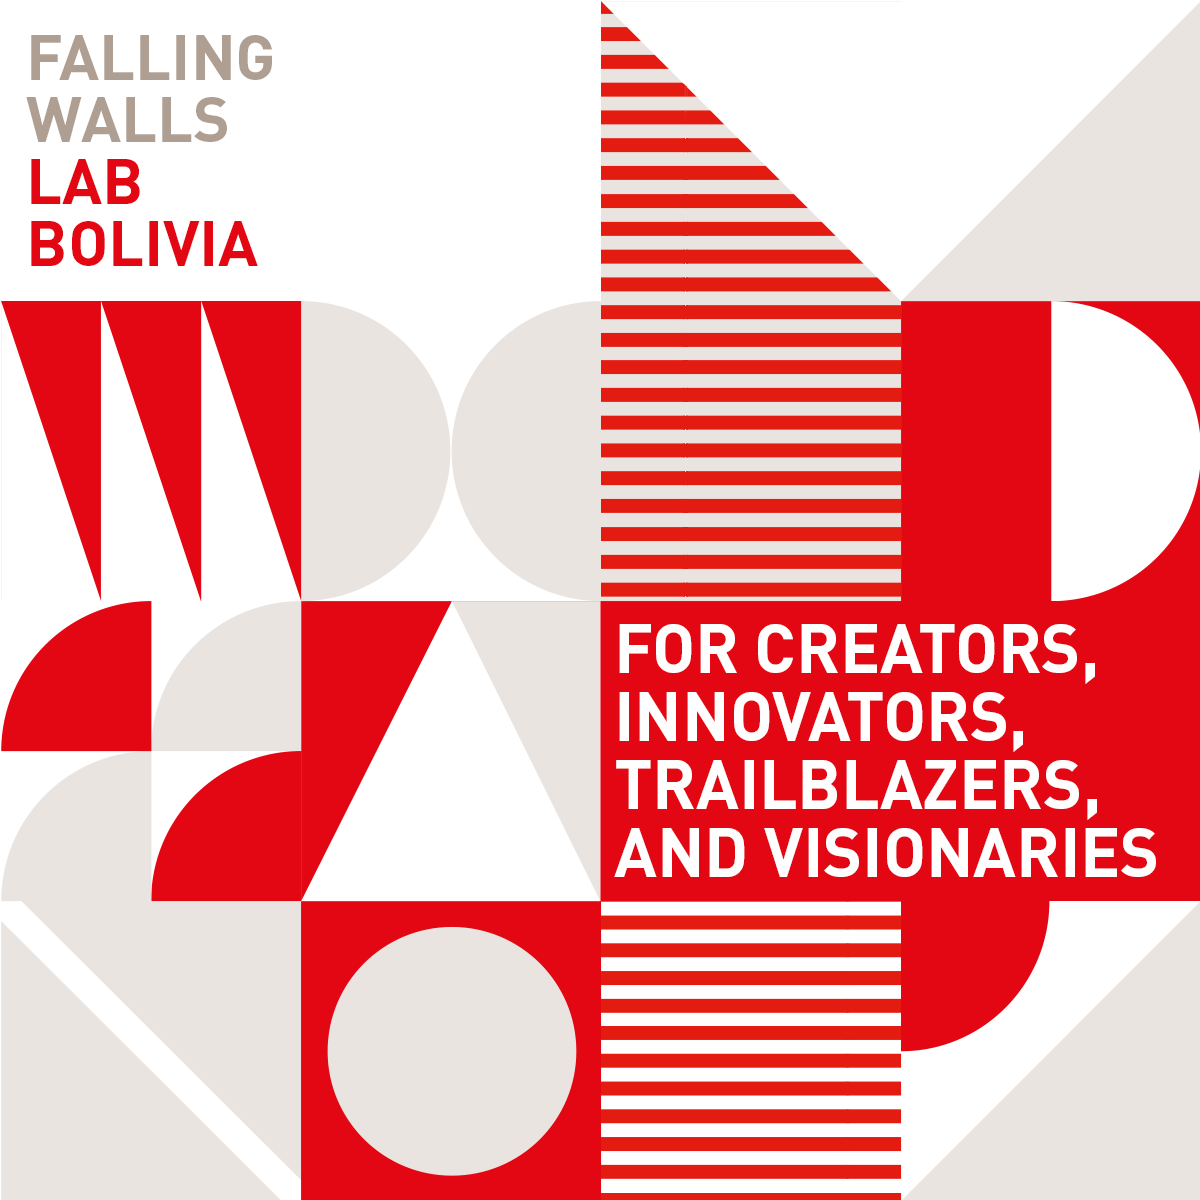 ++FALLING WALLS LAB IS COMING TO BOLIVIA 2021++